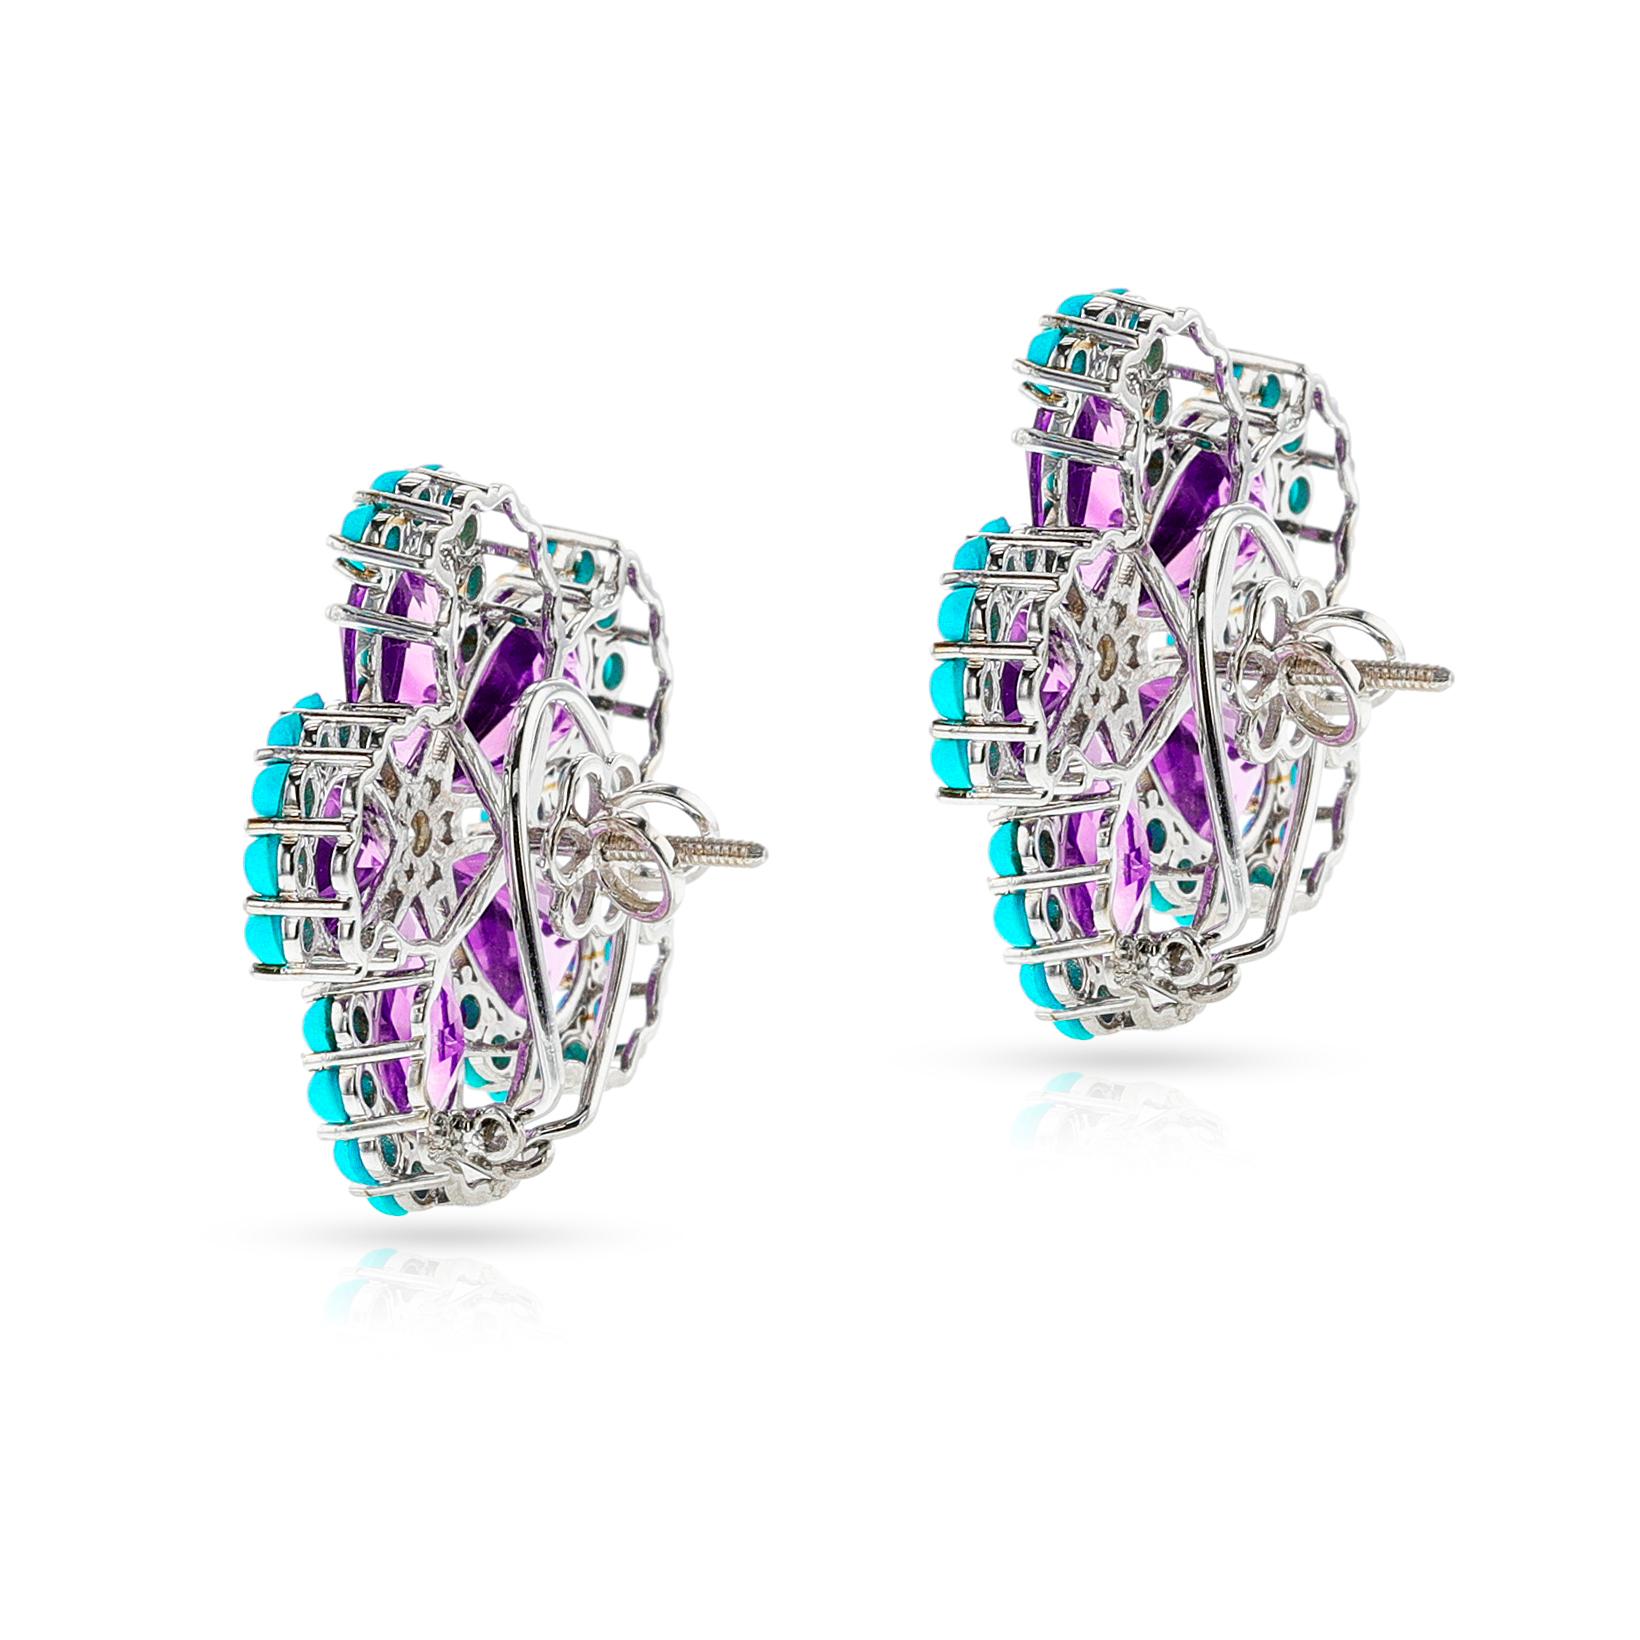 A pair of Amethyst, Turquoise Cabochon, and Diamond Floral Earrings, 18k White Gold. The amethyst and turquoise weigh 26.4 carats. The diamonds weigh appx. 0.30 carats. The total weight of the earring is 20.35 grams.  The length is 1.10